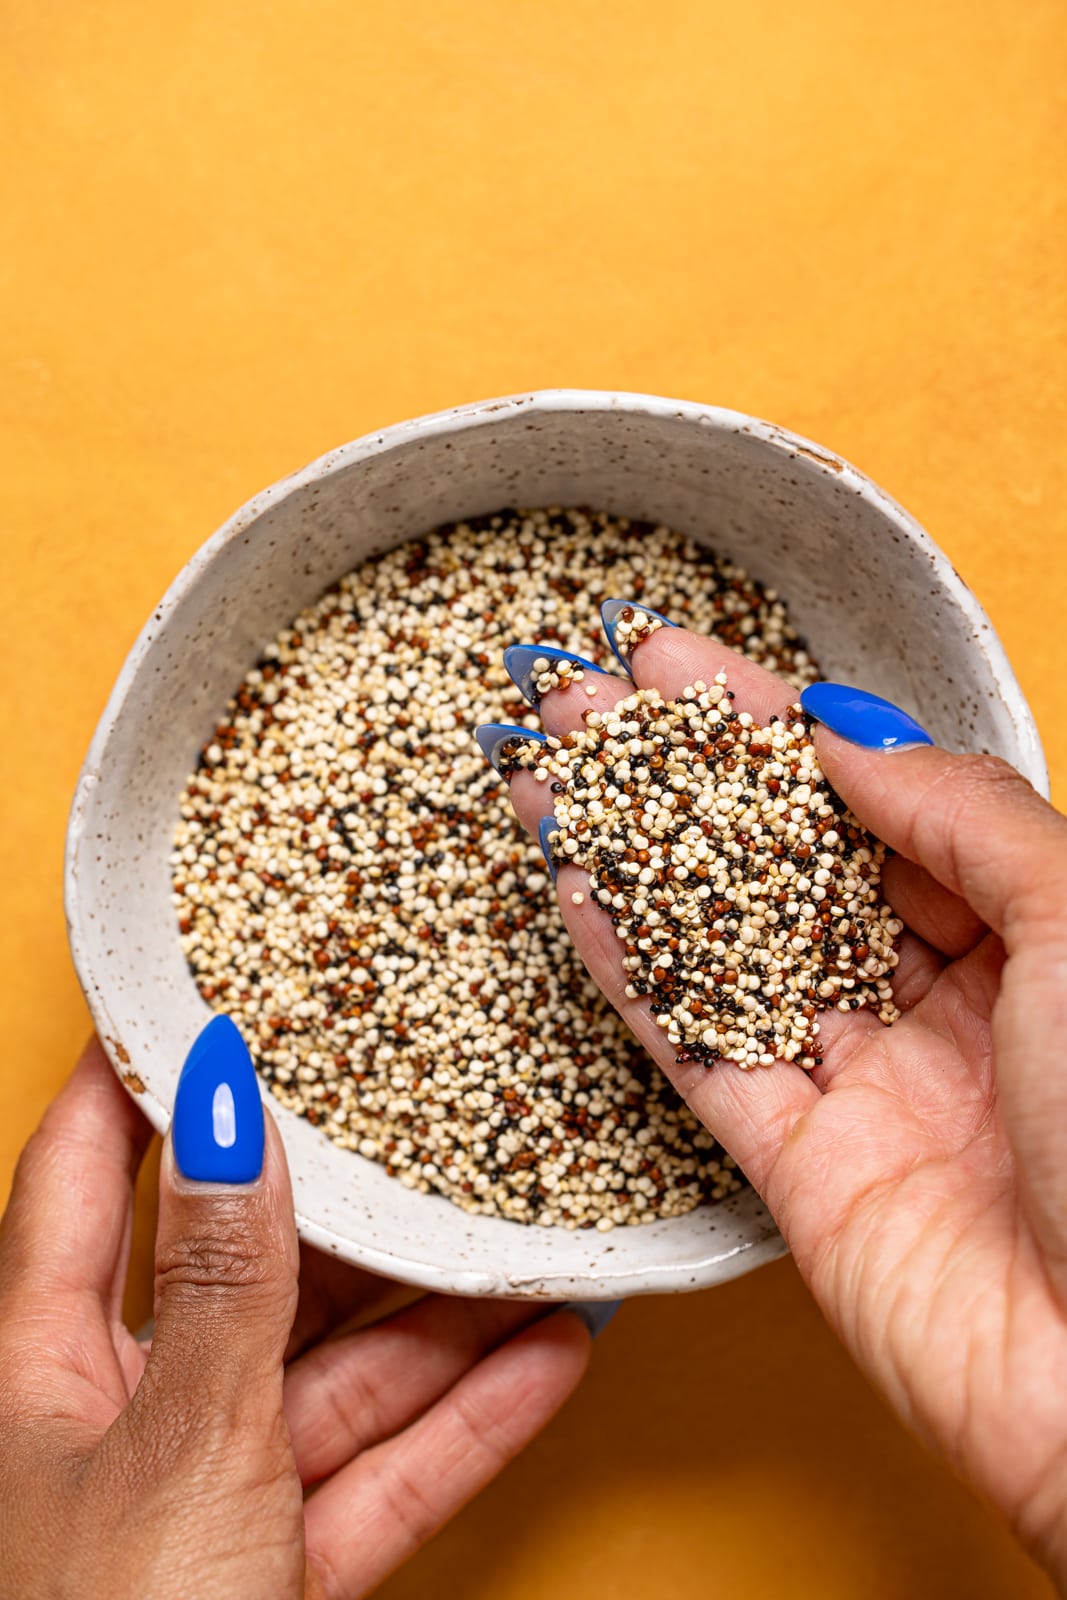 A bowl with dry quinoa being held with hands.